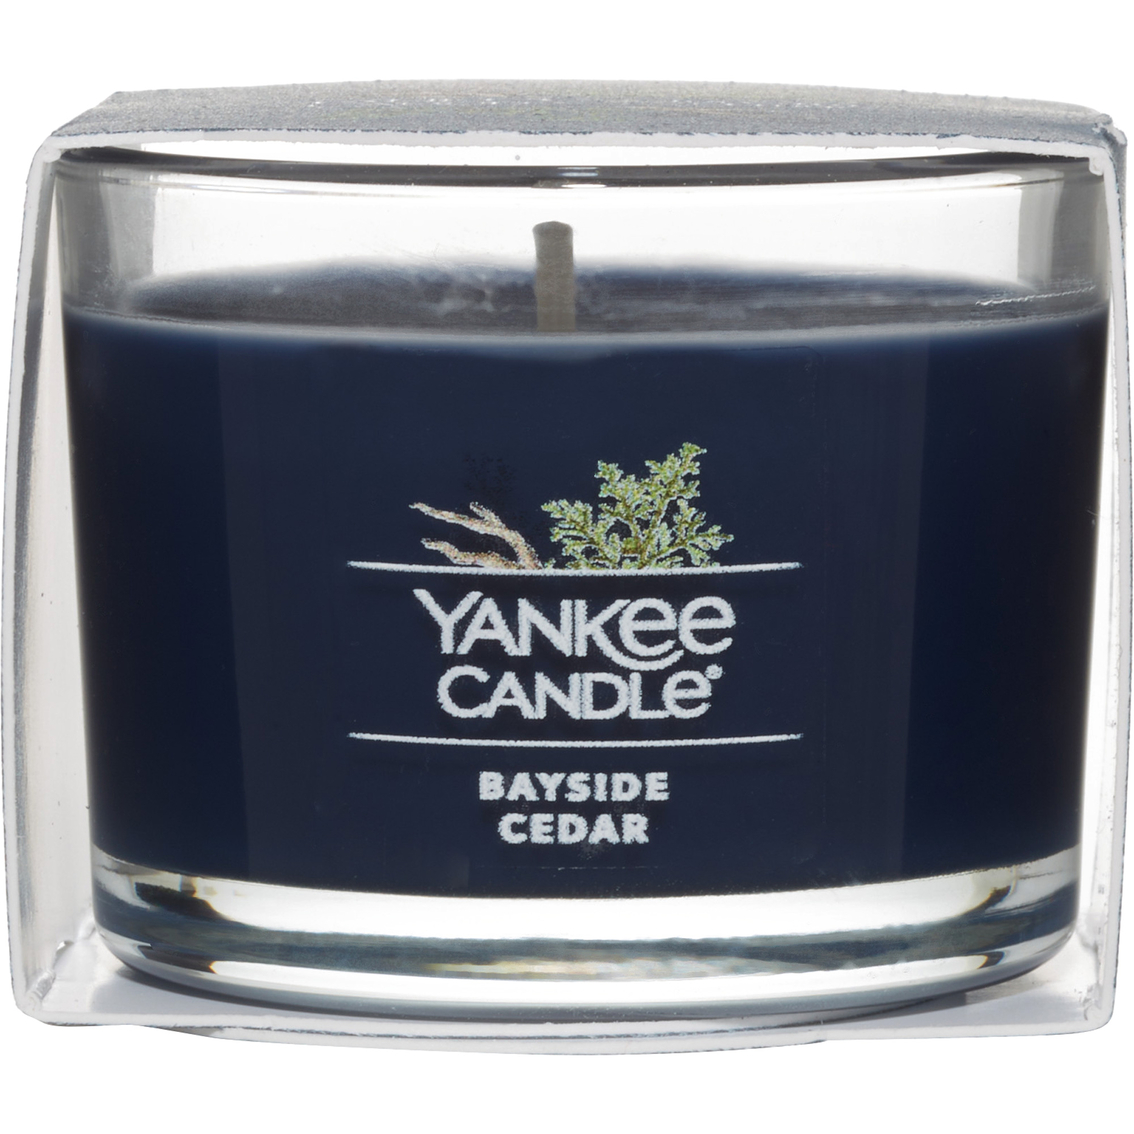 Yankee Candle Bayside Cedar Filled Votive Mini Candle, Candles & Home  Fragrance, Household